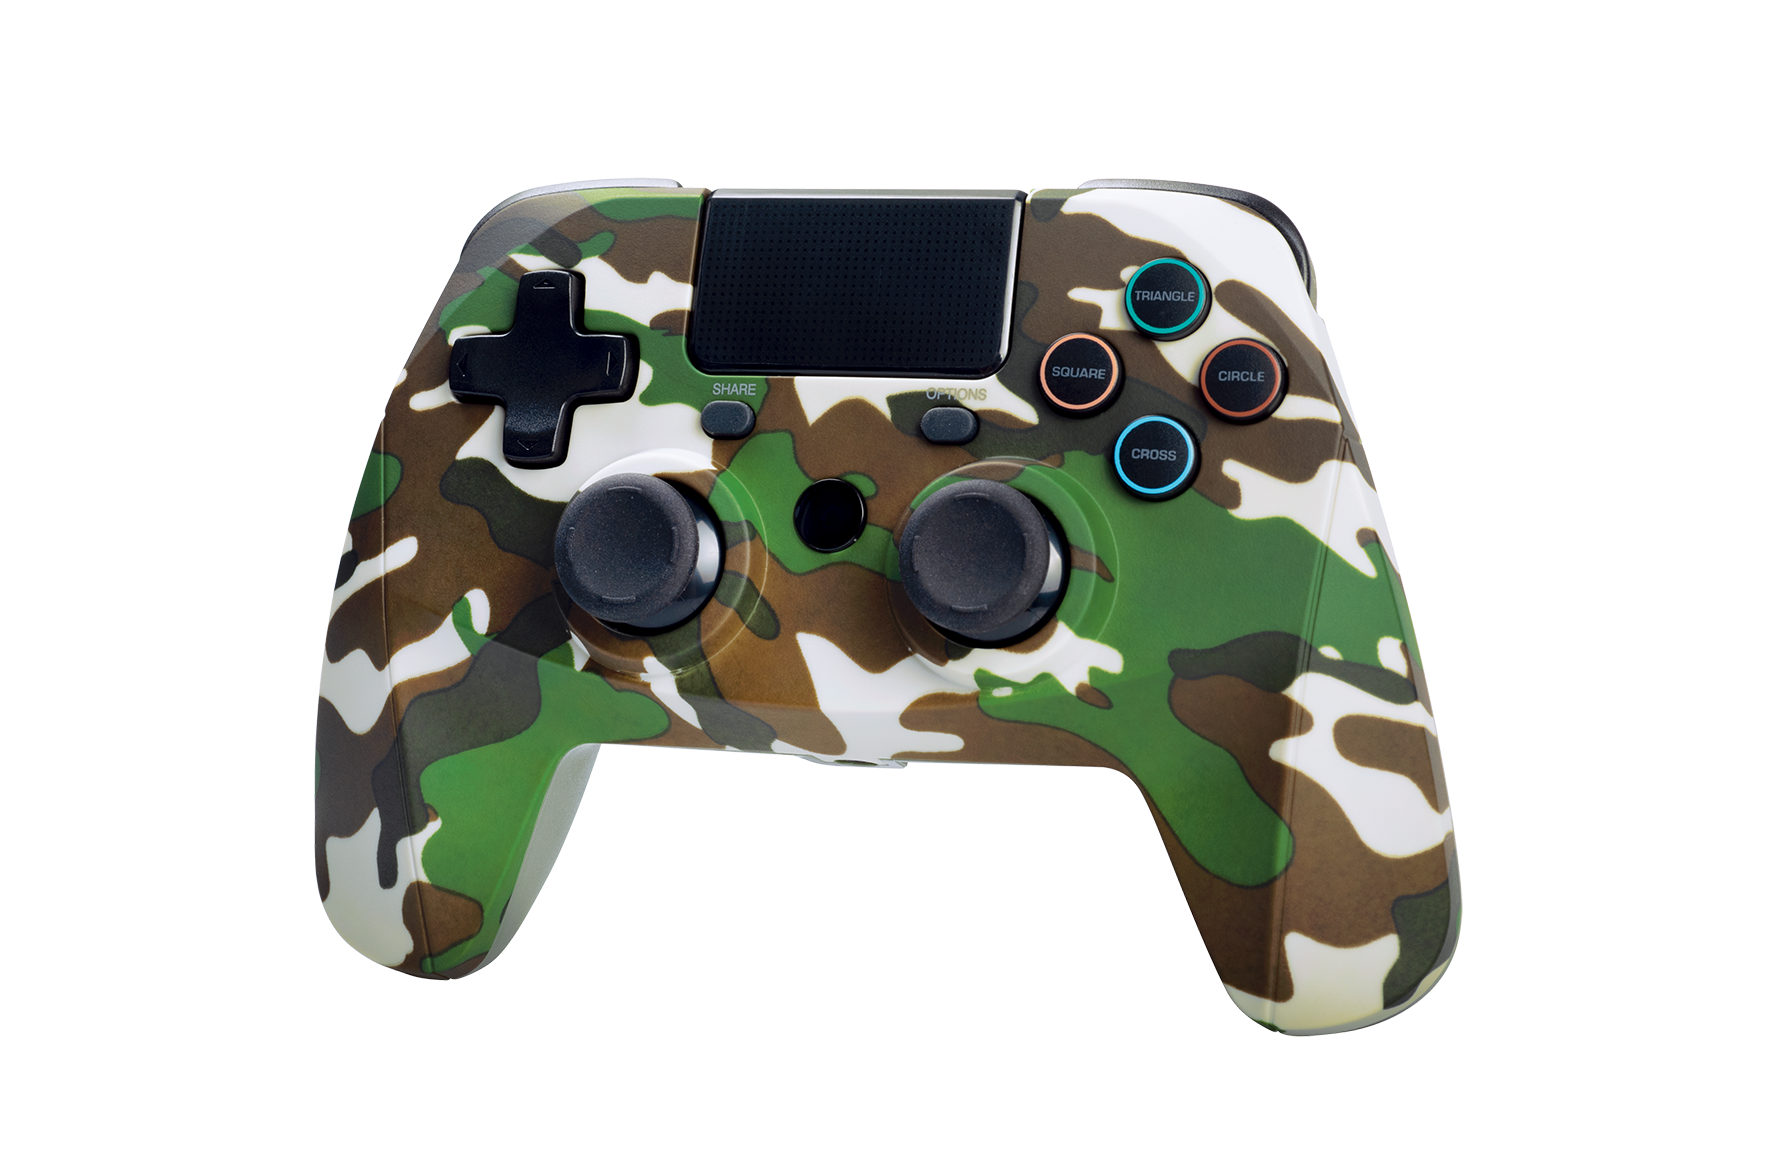 PLAYMAX CAMO WIRELESS CONTROLLER - PS4